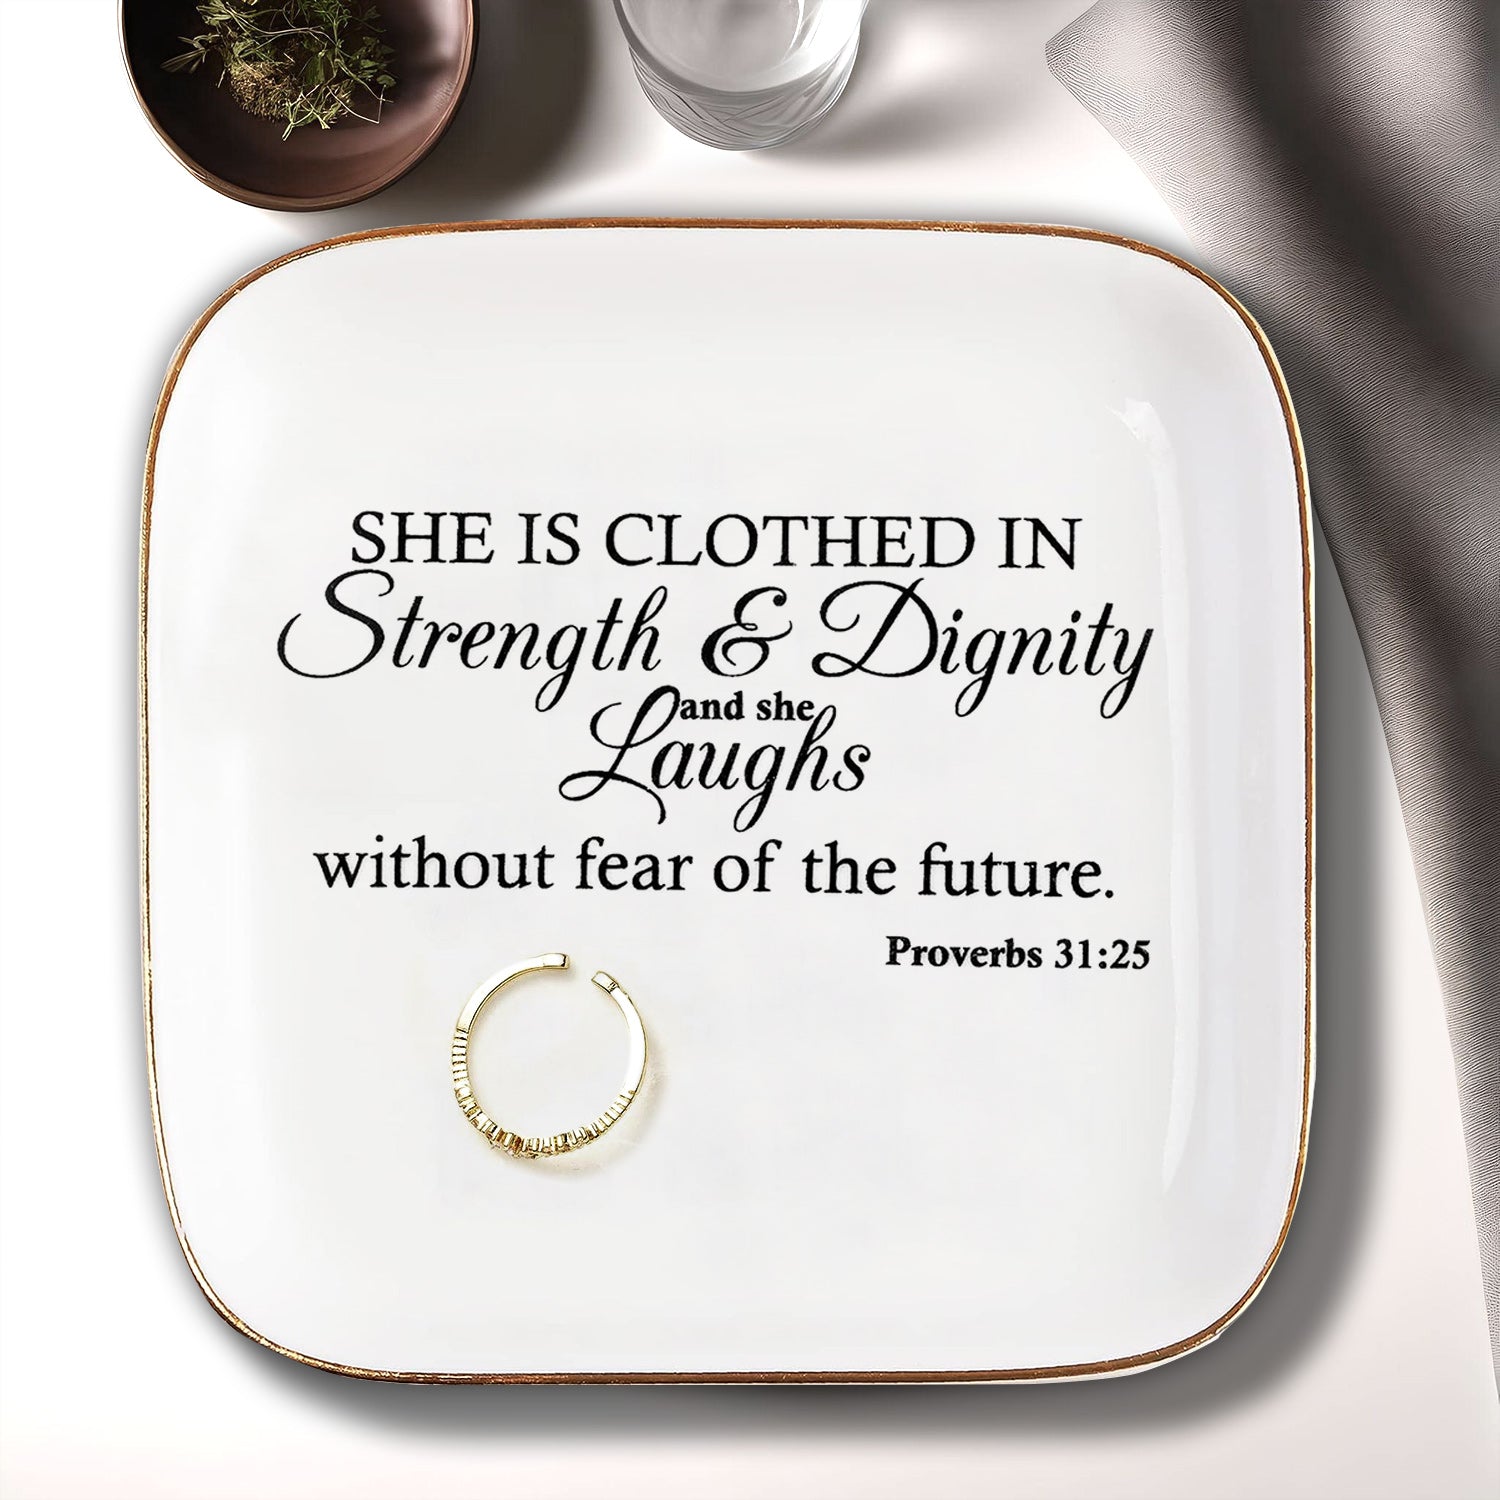 She is clothed in Strength Inspirational Gifts for Women Ceramic Ring Dish Birthday Gifts for Women Unique, Best Friends Gifts For Women Her Mom Sister Coworker